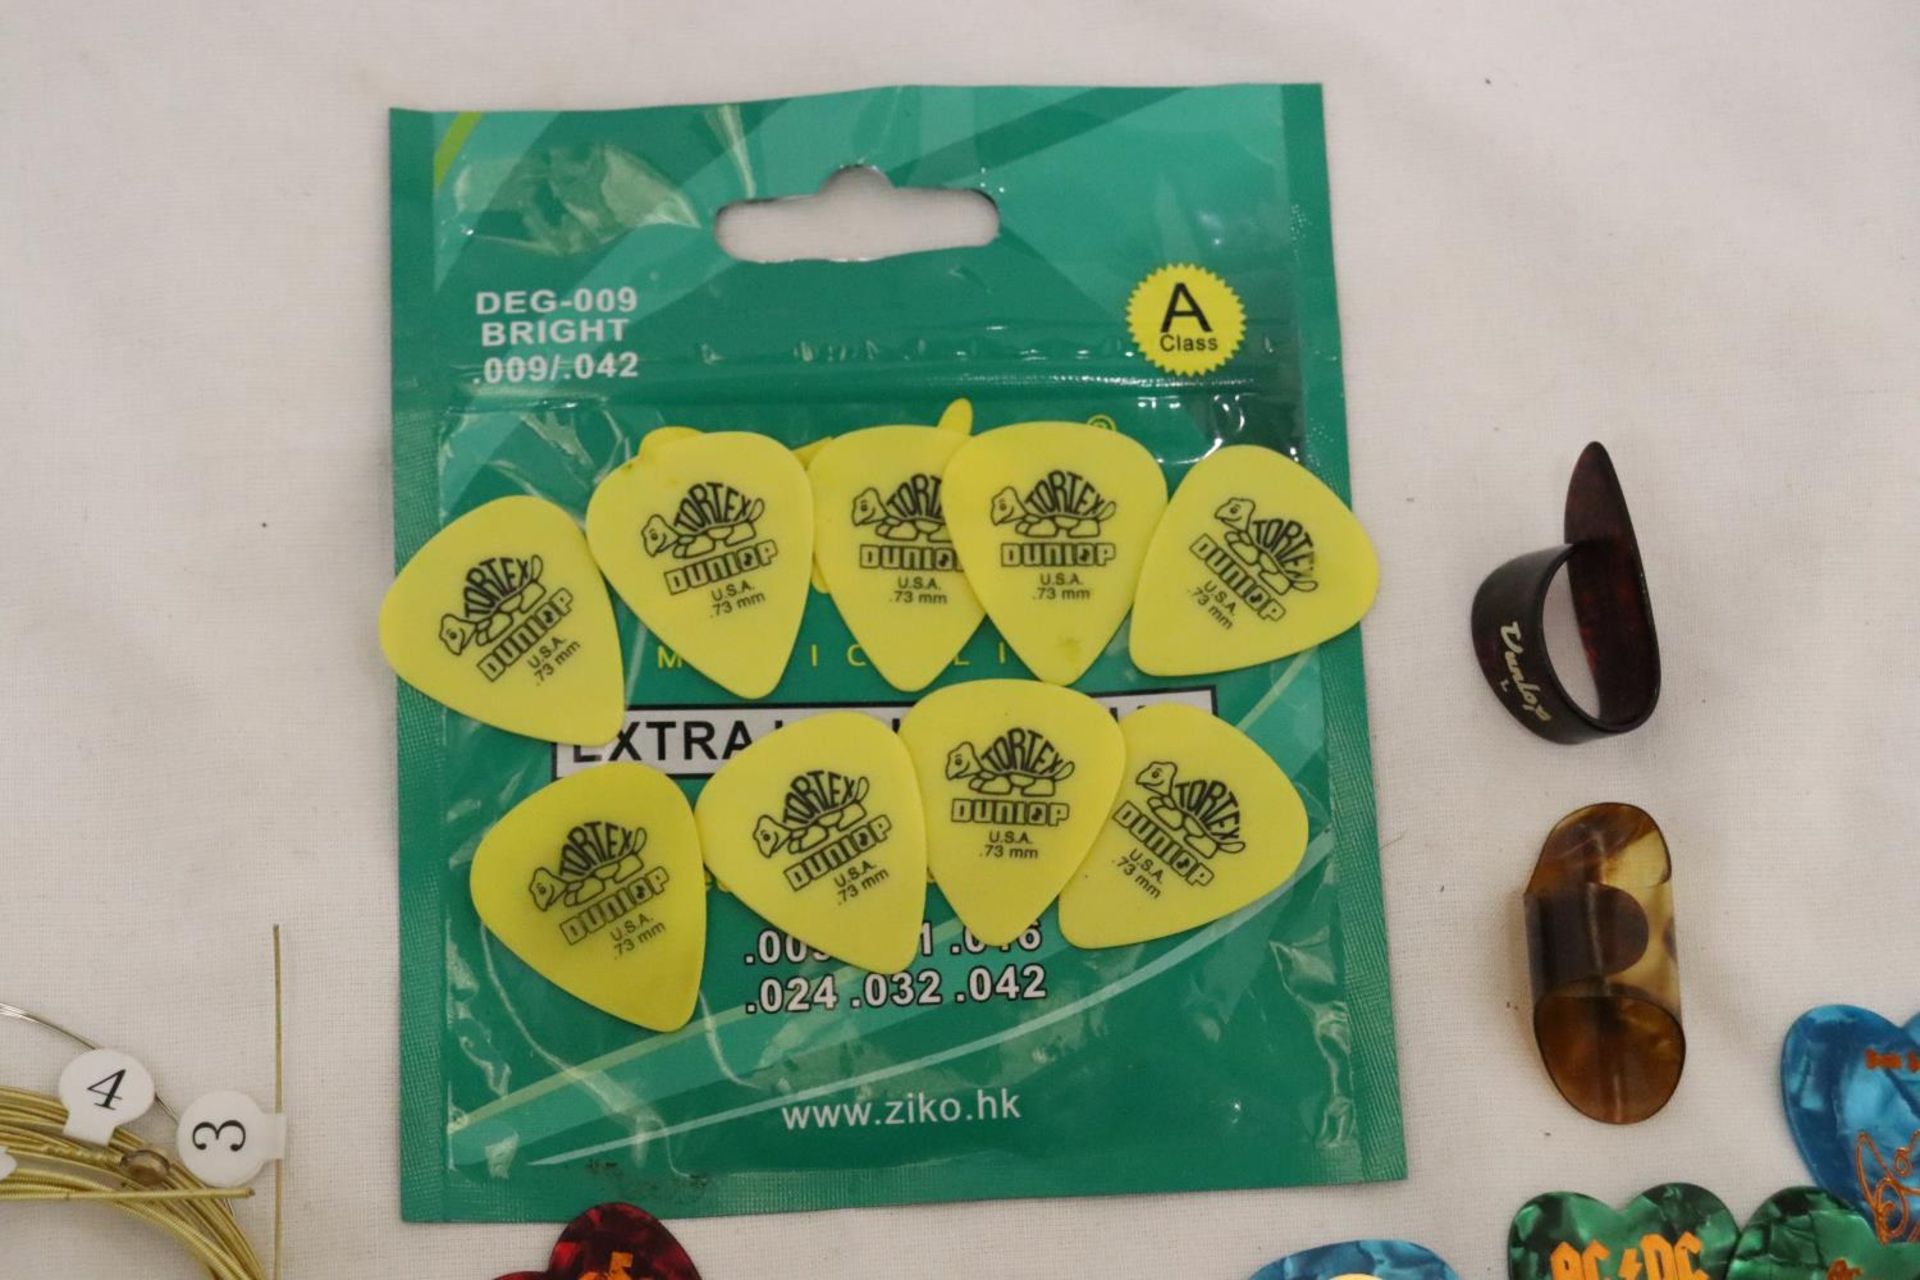 A QUANTITY OF ELECTRIC GUITAR STRINGS AND PLECTRUMS - Image 2 of 4